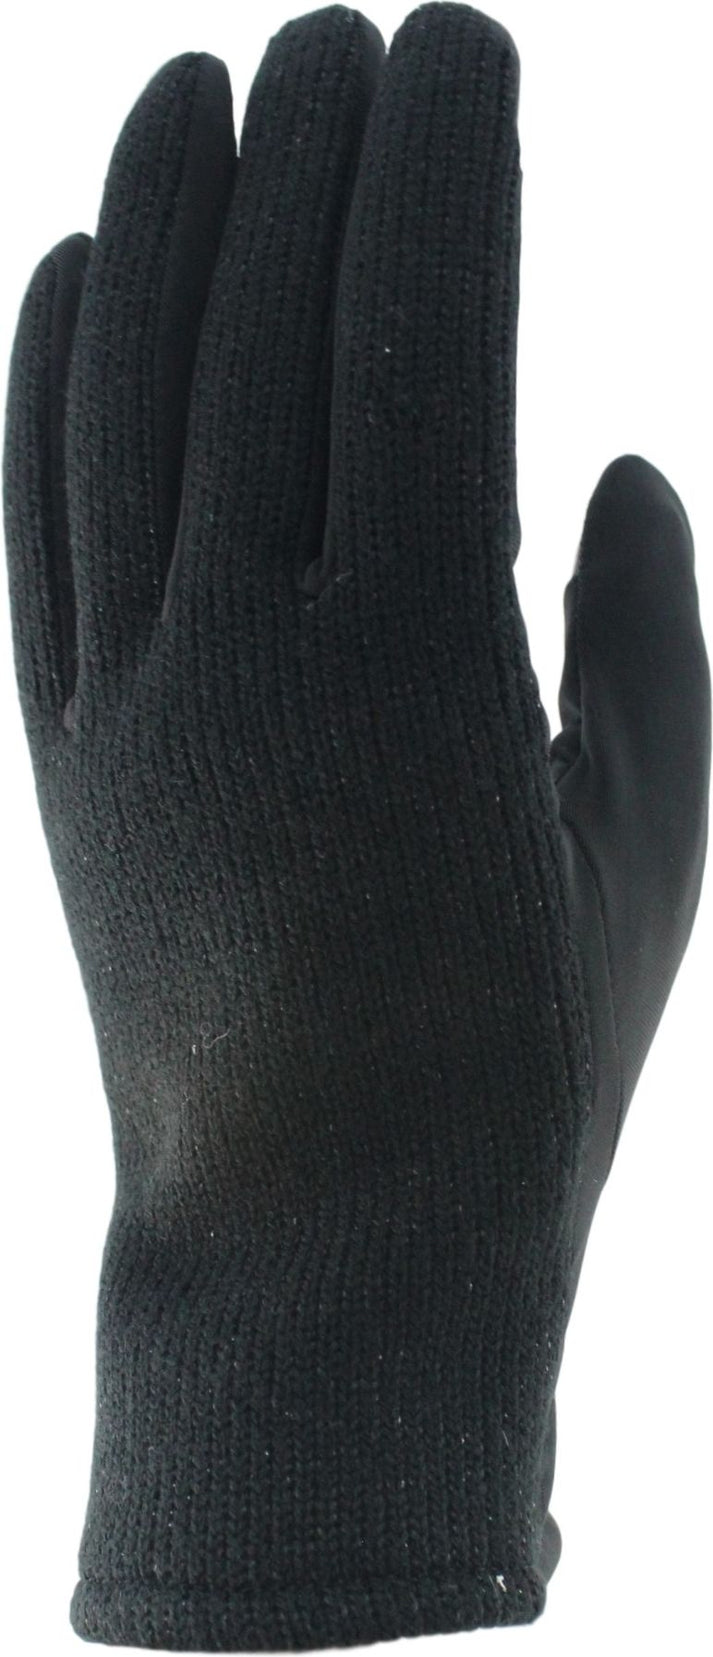 Sterling Glove Accessories Knit Spandex Palm Touch Leather Patch C40 Thinsulate Black